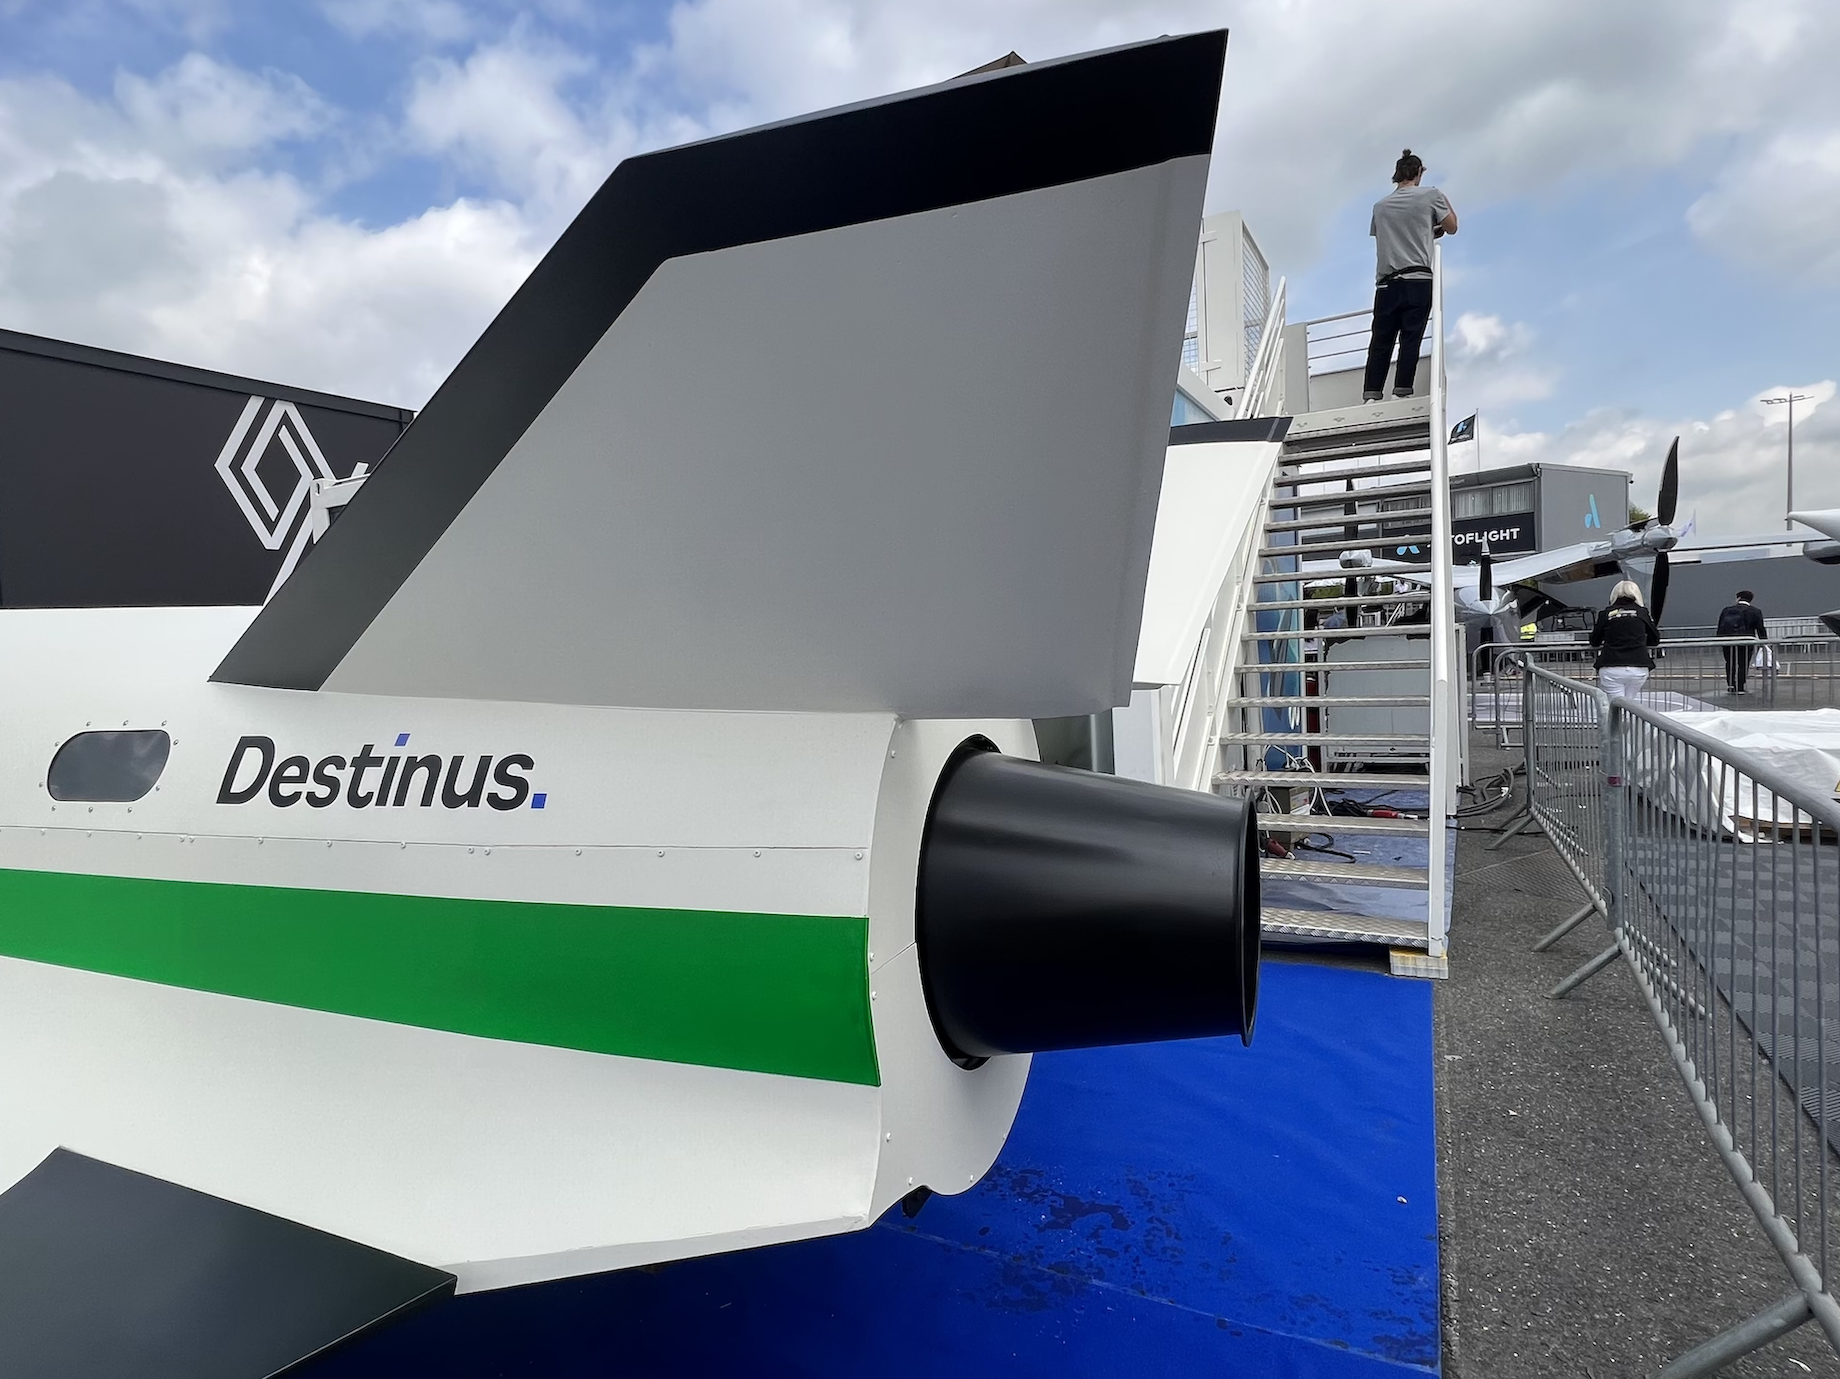 Engine of the Destinus 3 testbed that will test speeds of up to Mach 1.3 using hydrogen.